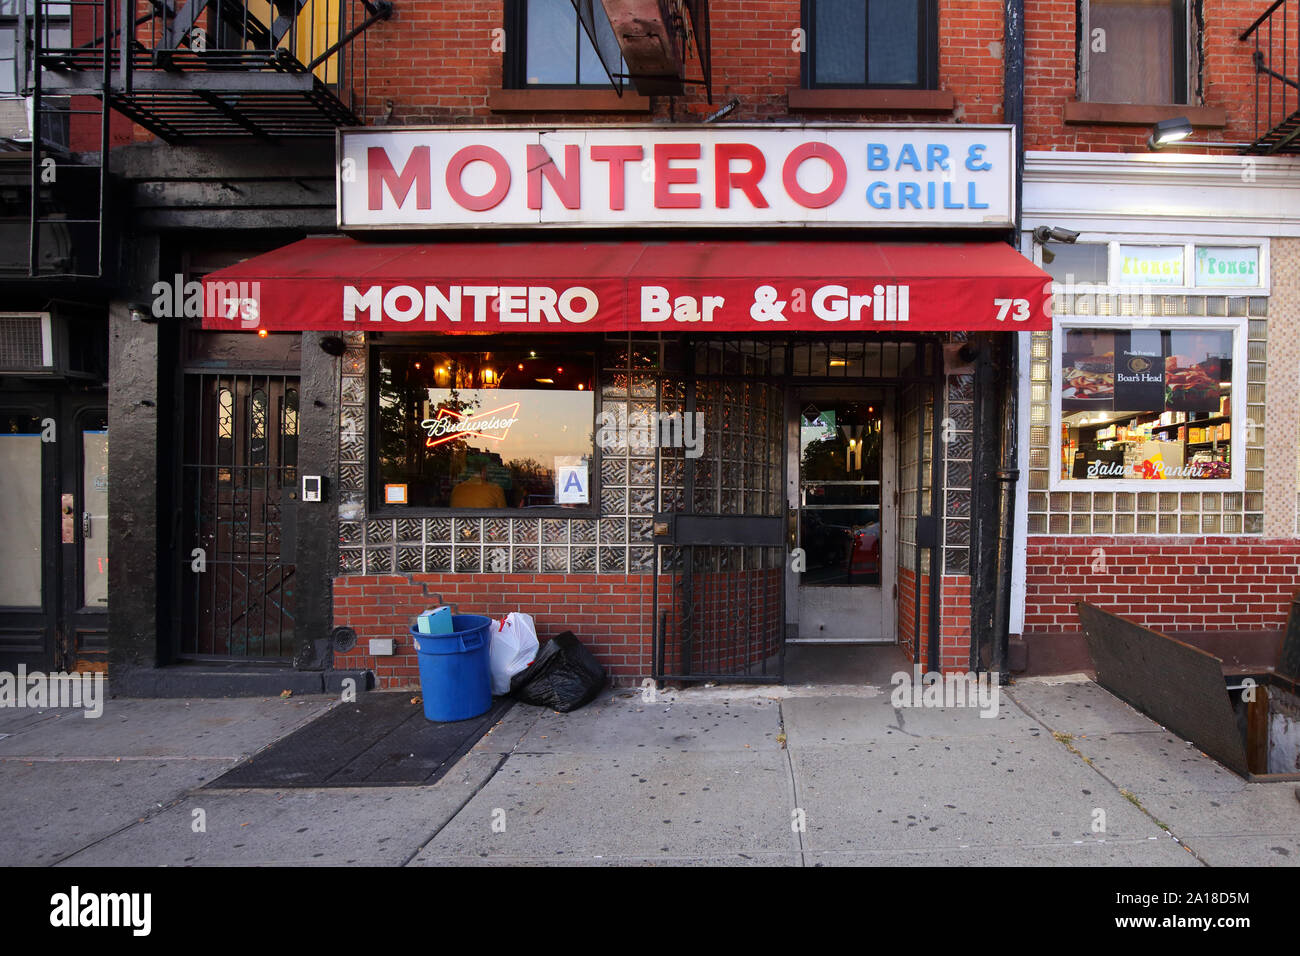 Montero, 73 Atlantic Avenue, Brooklyn, New York. NYC storefront photo of a bar in brooklyn heights Stock Photo